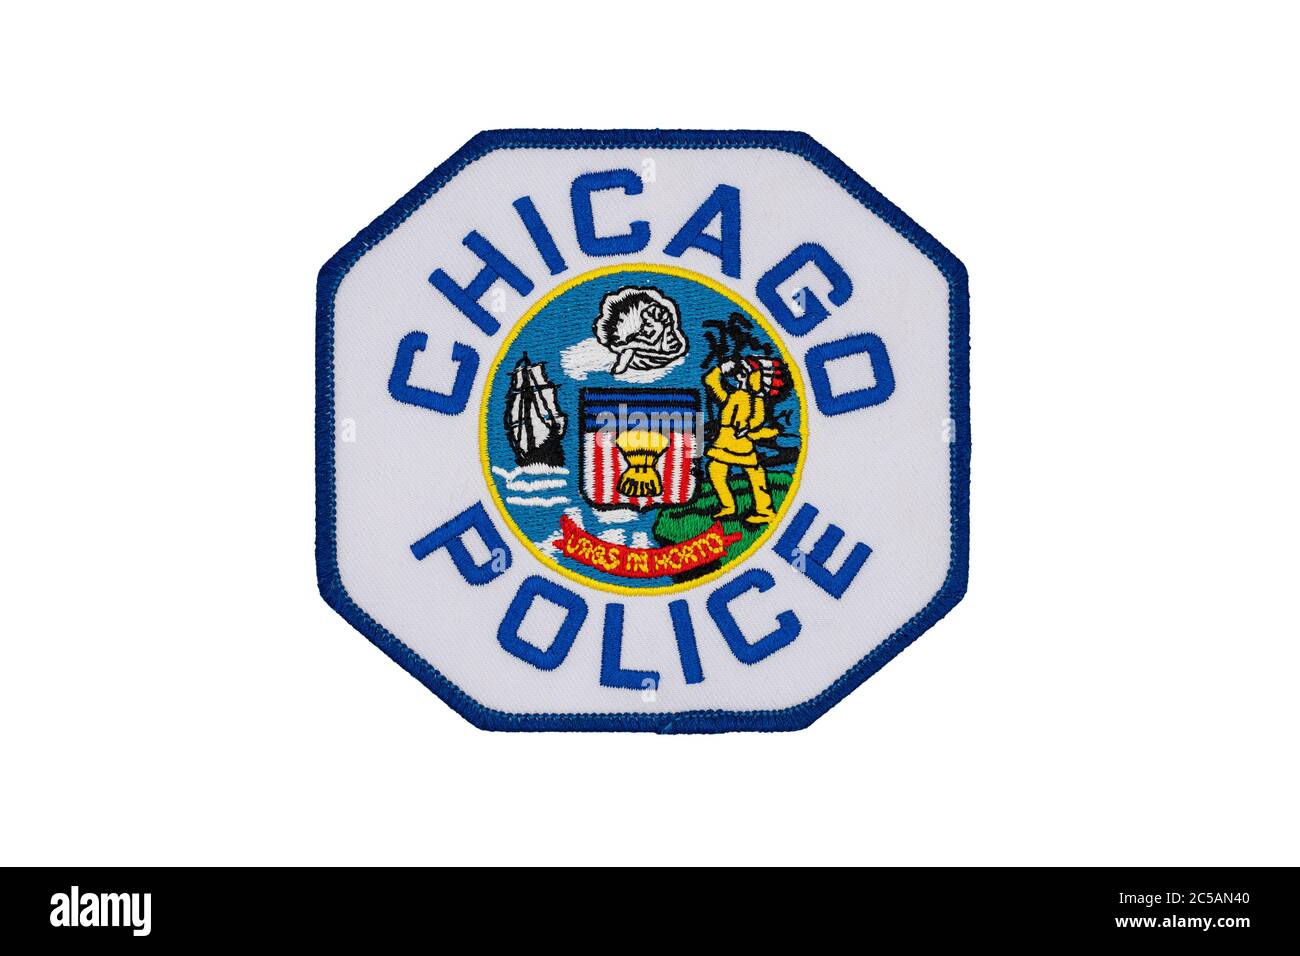 Official shoulder patch of the Chicago Police Department isolated on white background. The Latin motto 'Urbs in horto' (City in a Garden), sewn on it. Stock Photo